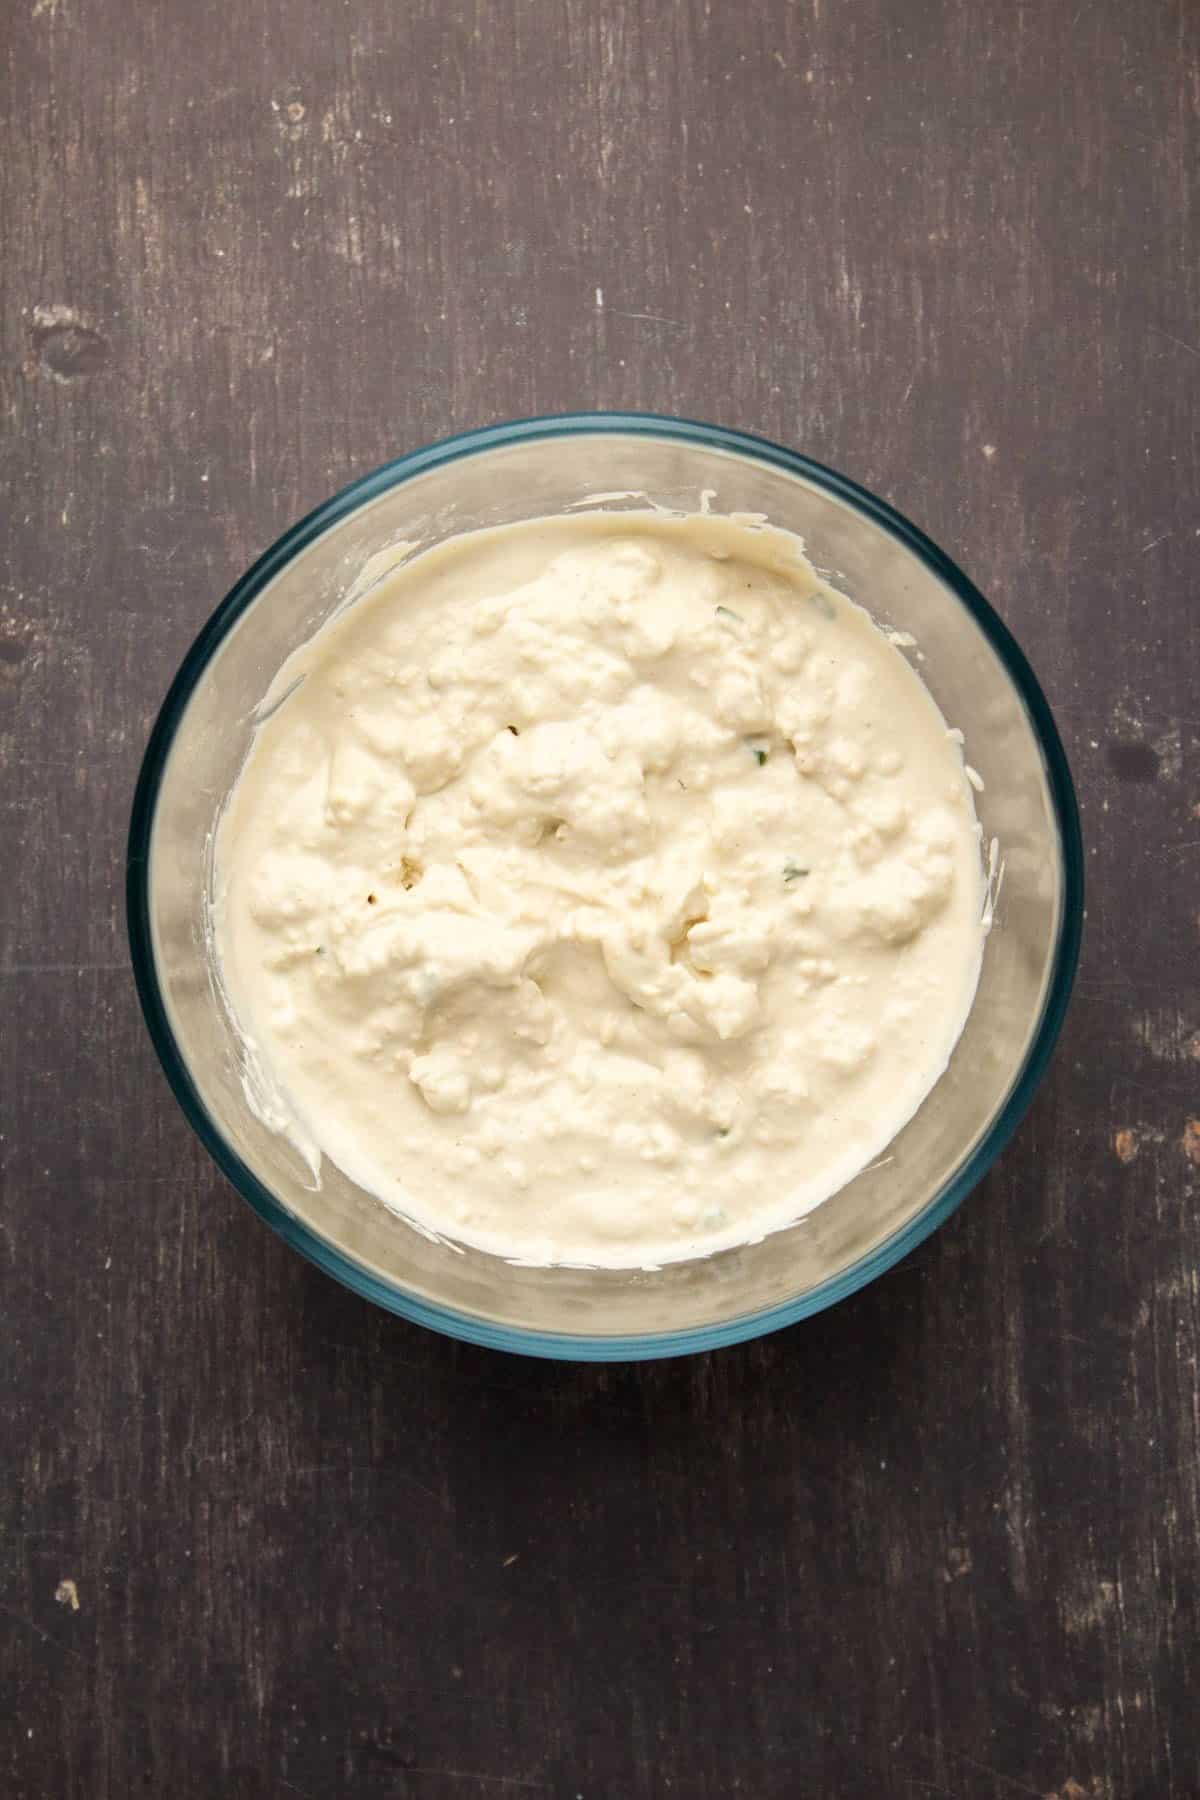 Vegan cottage cheese in a bowl.